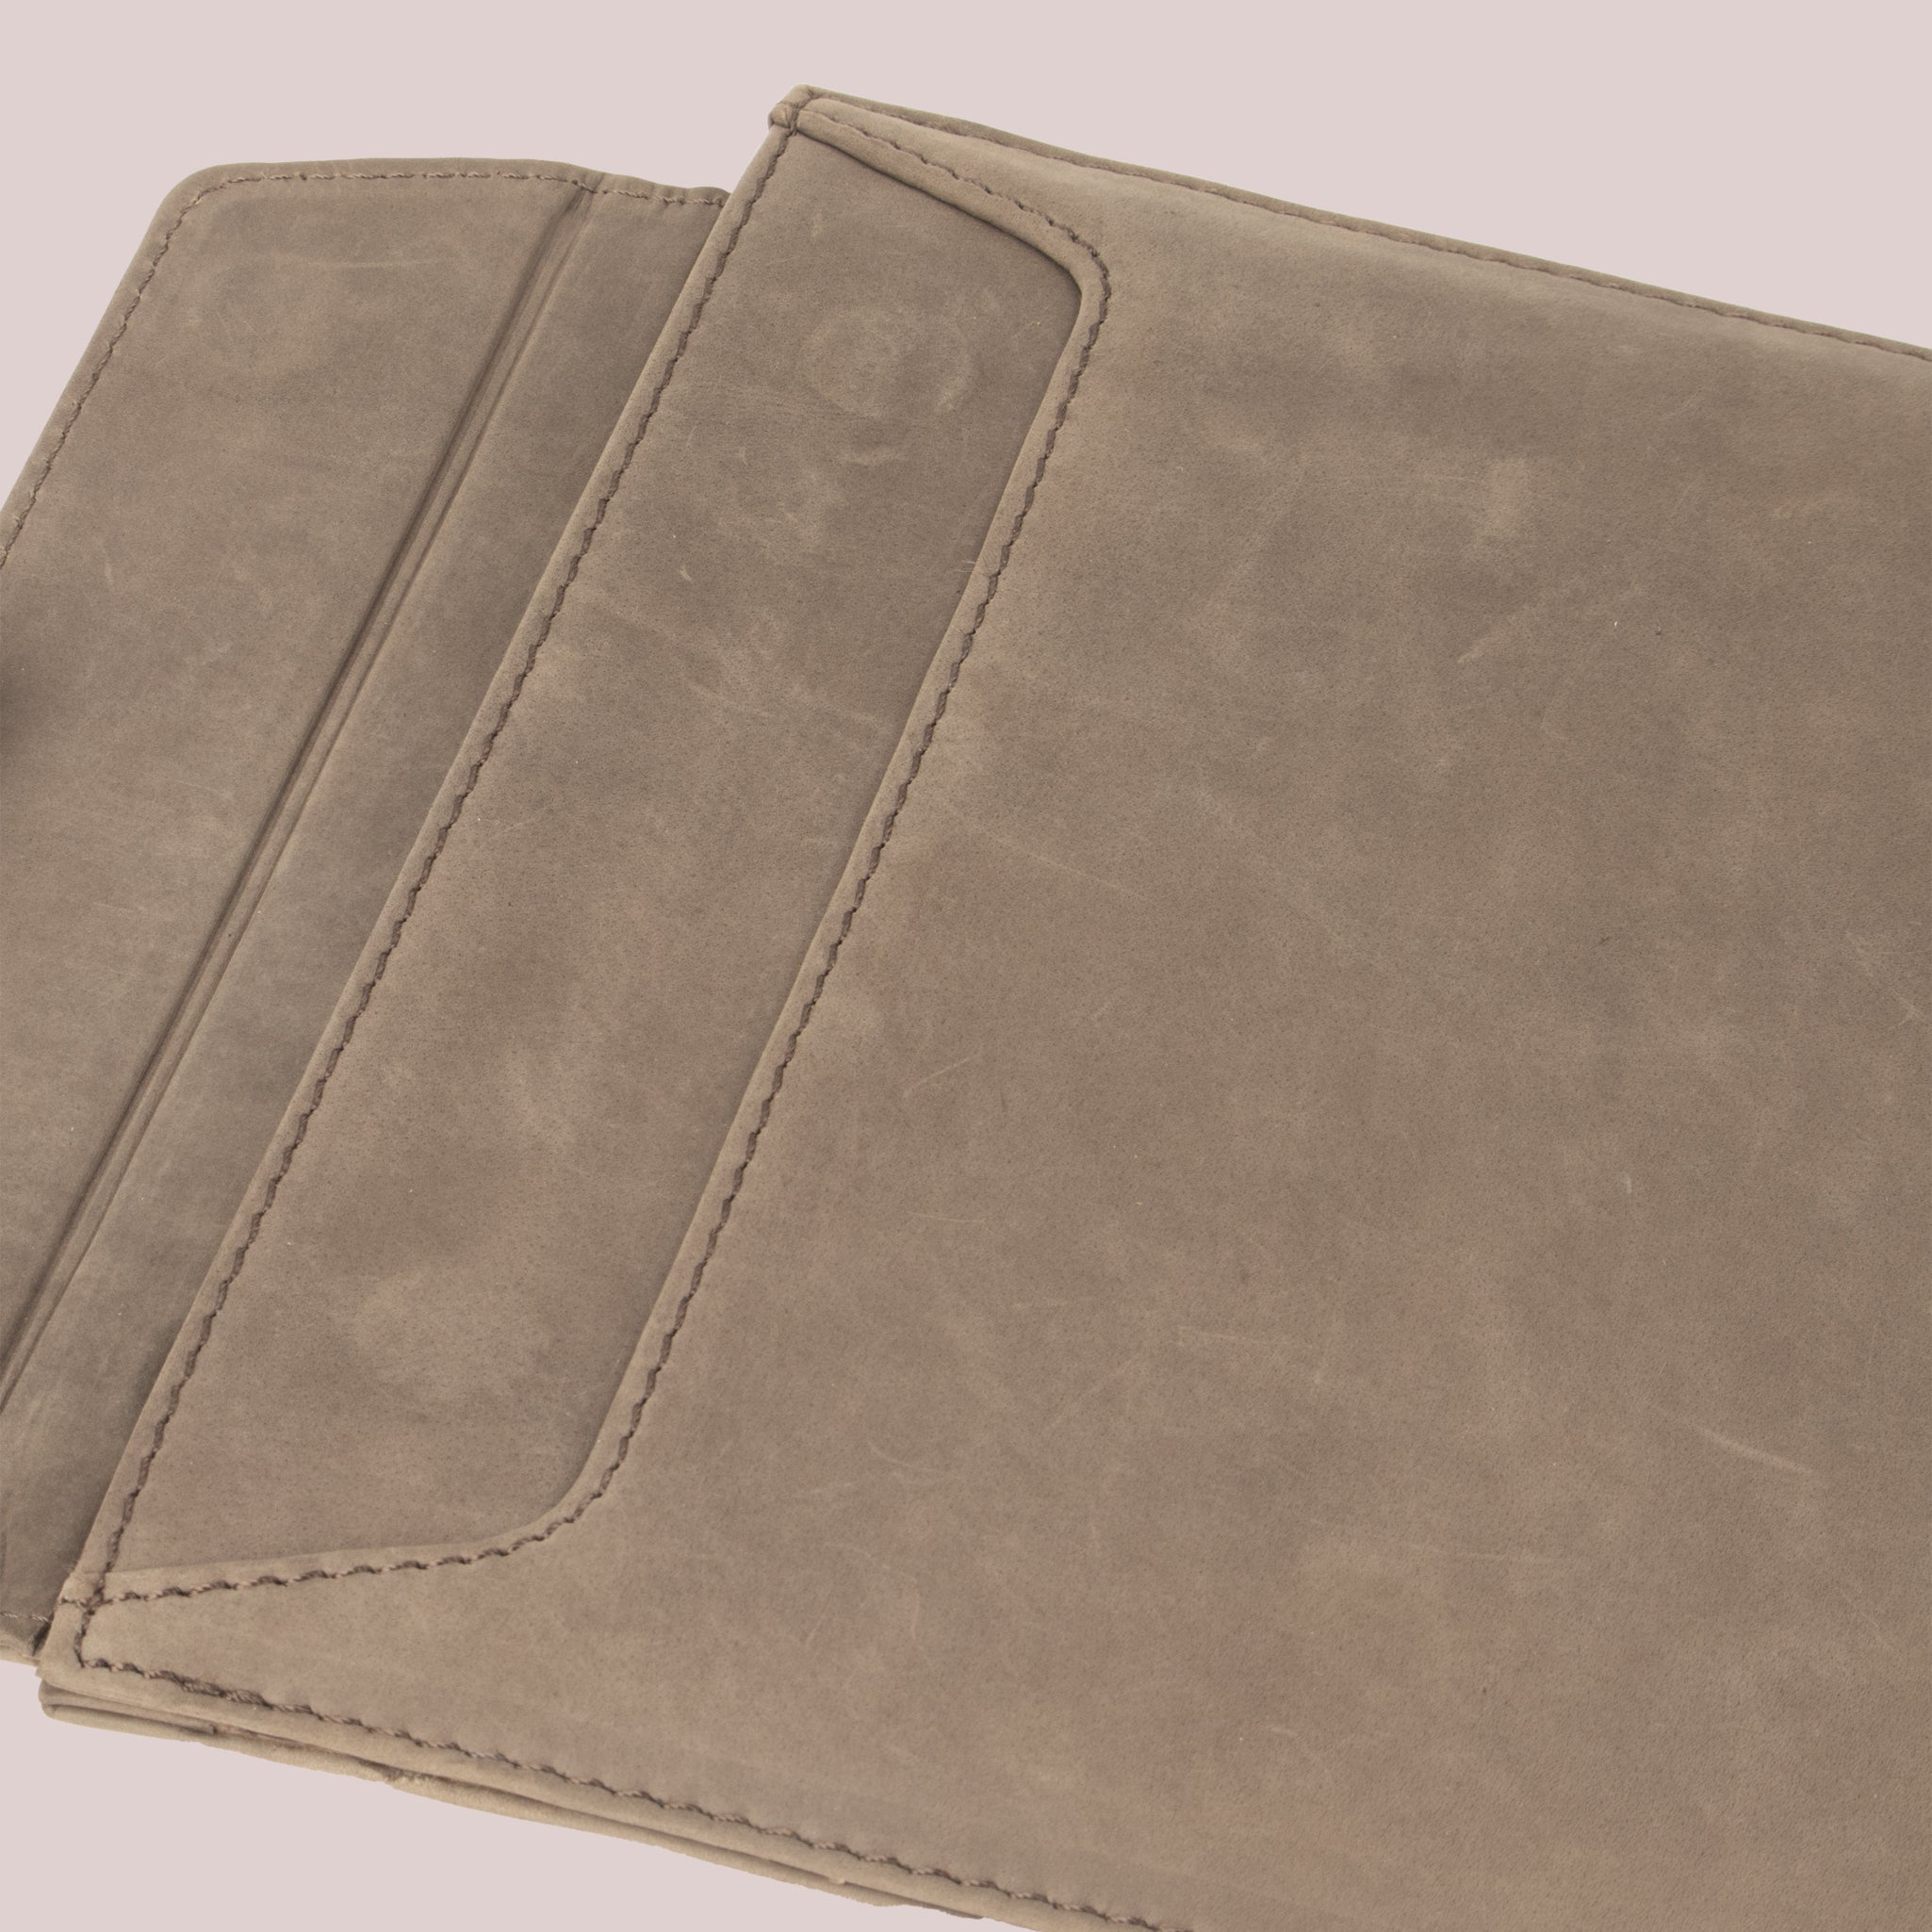 Grey leather sleeve with a flap for Macbook laptops